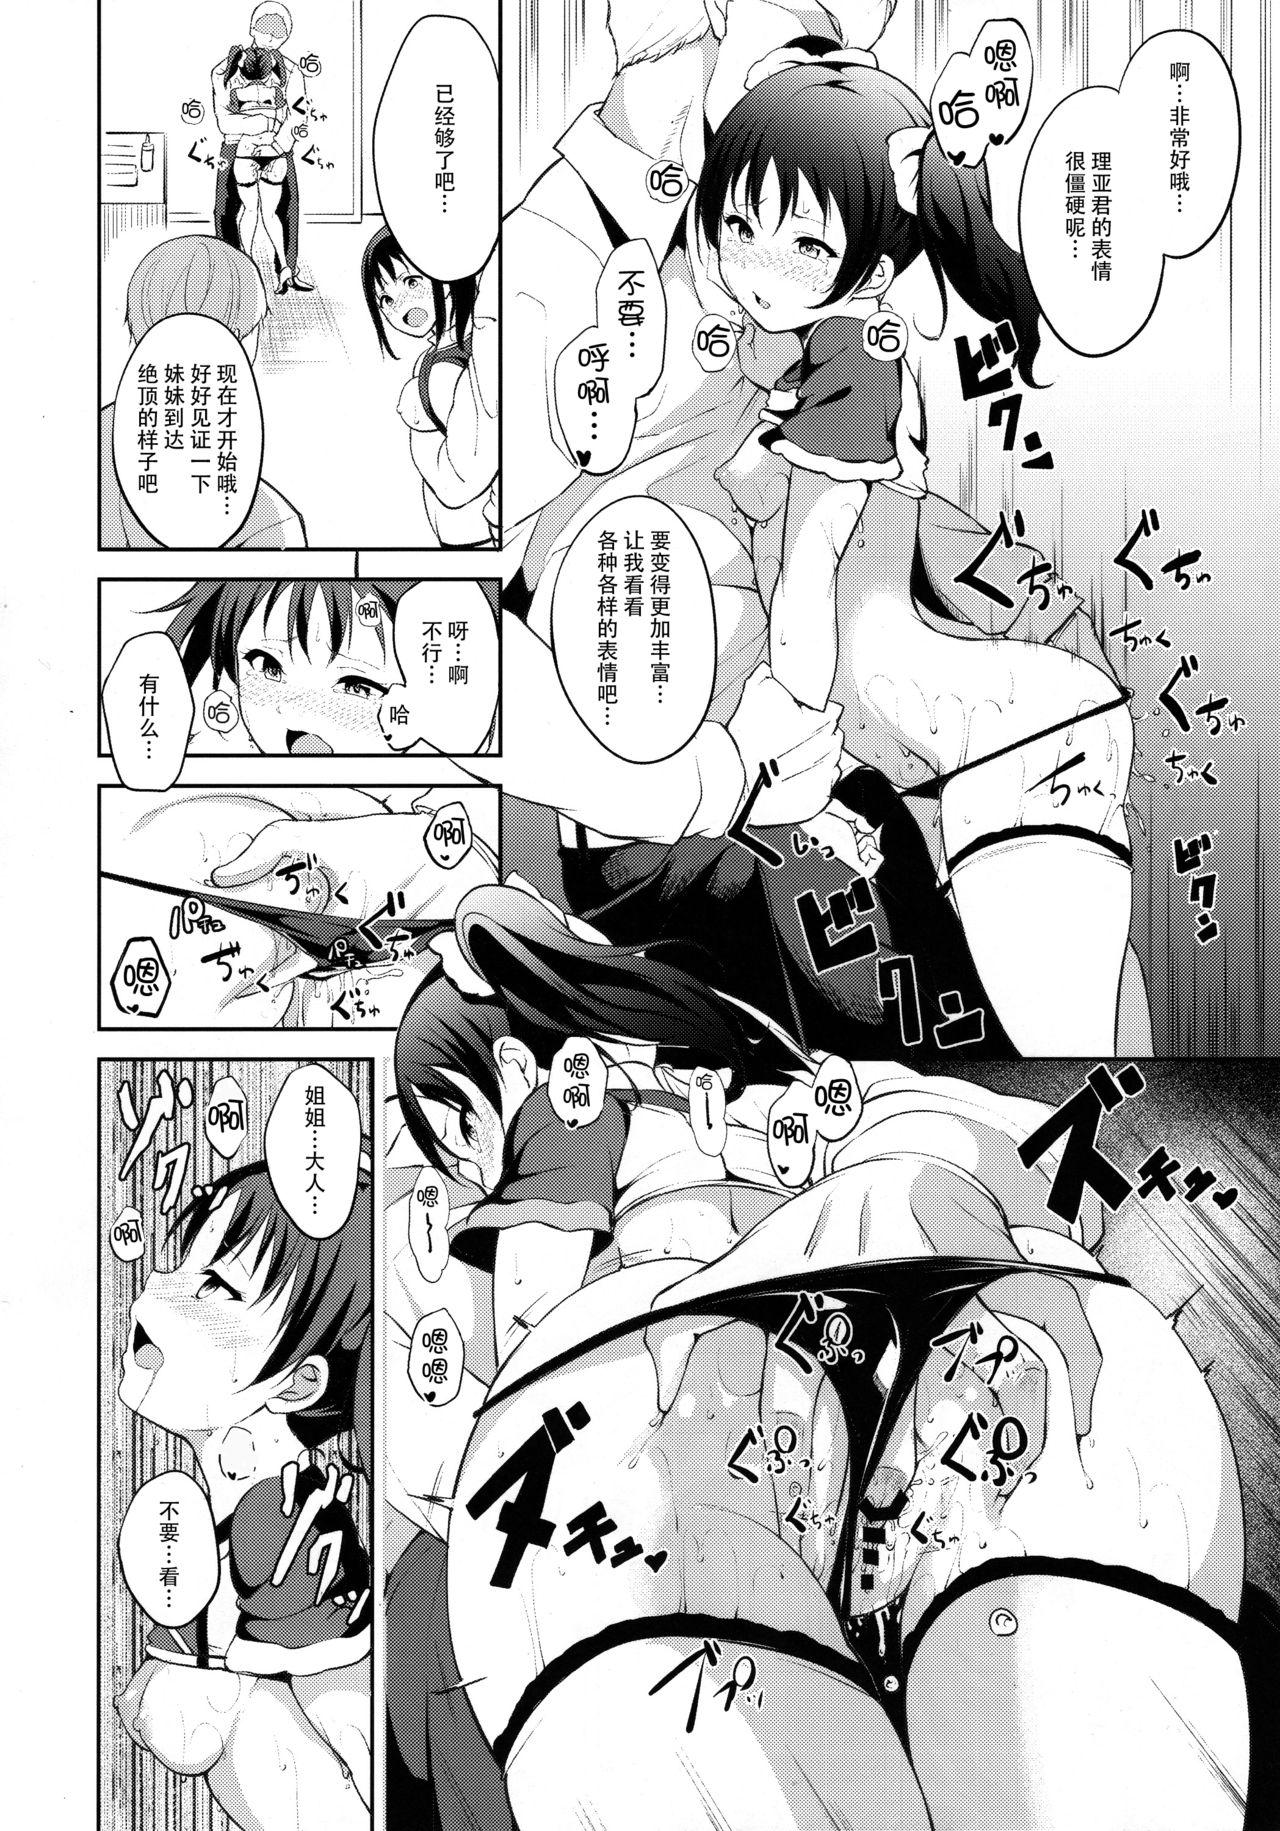 Facials TRANCE CONTROL - Love live sunshine Behind - Page 8